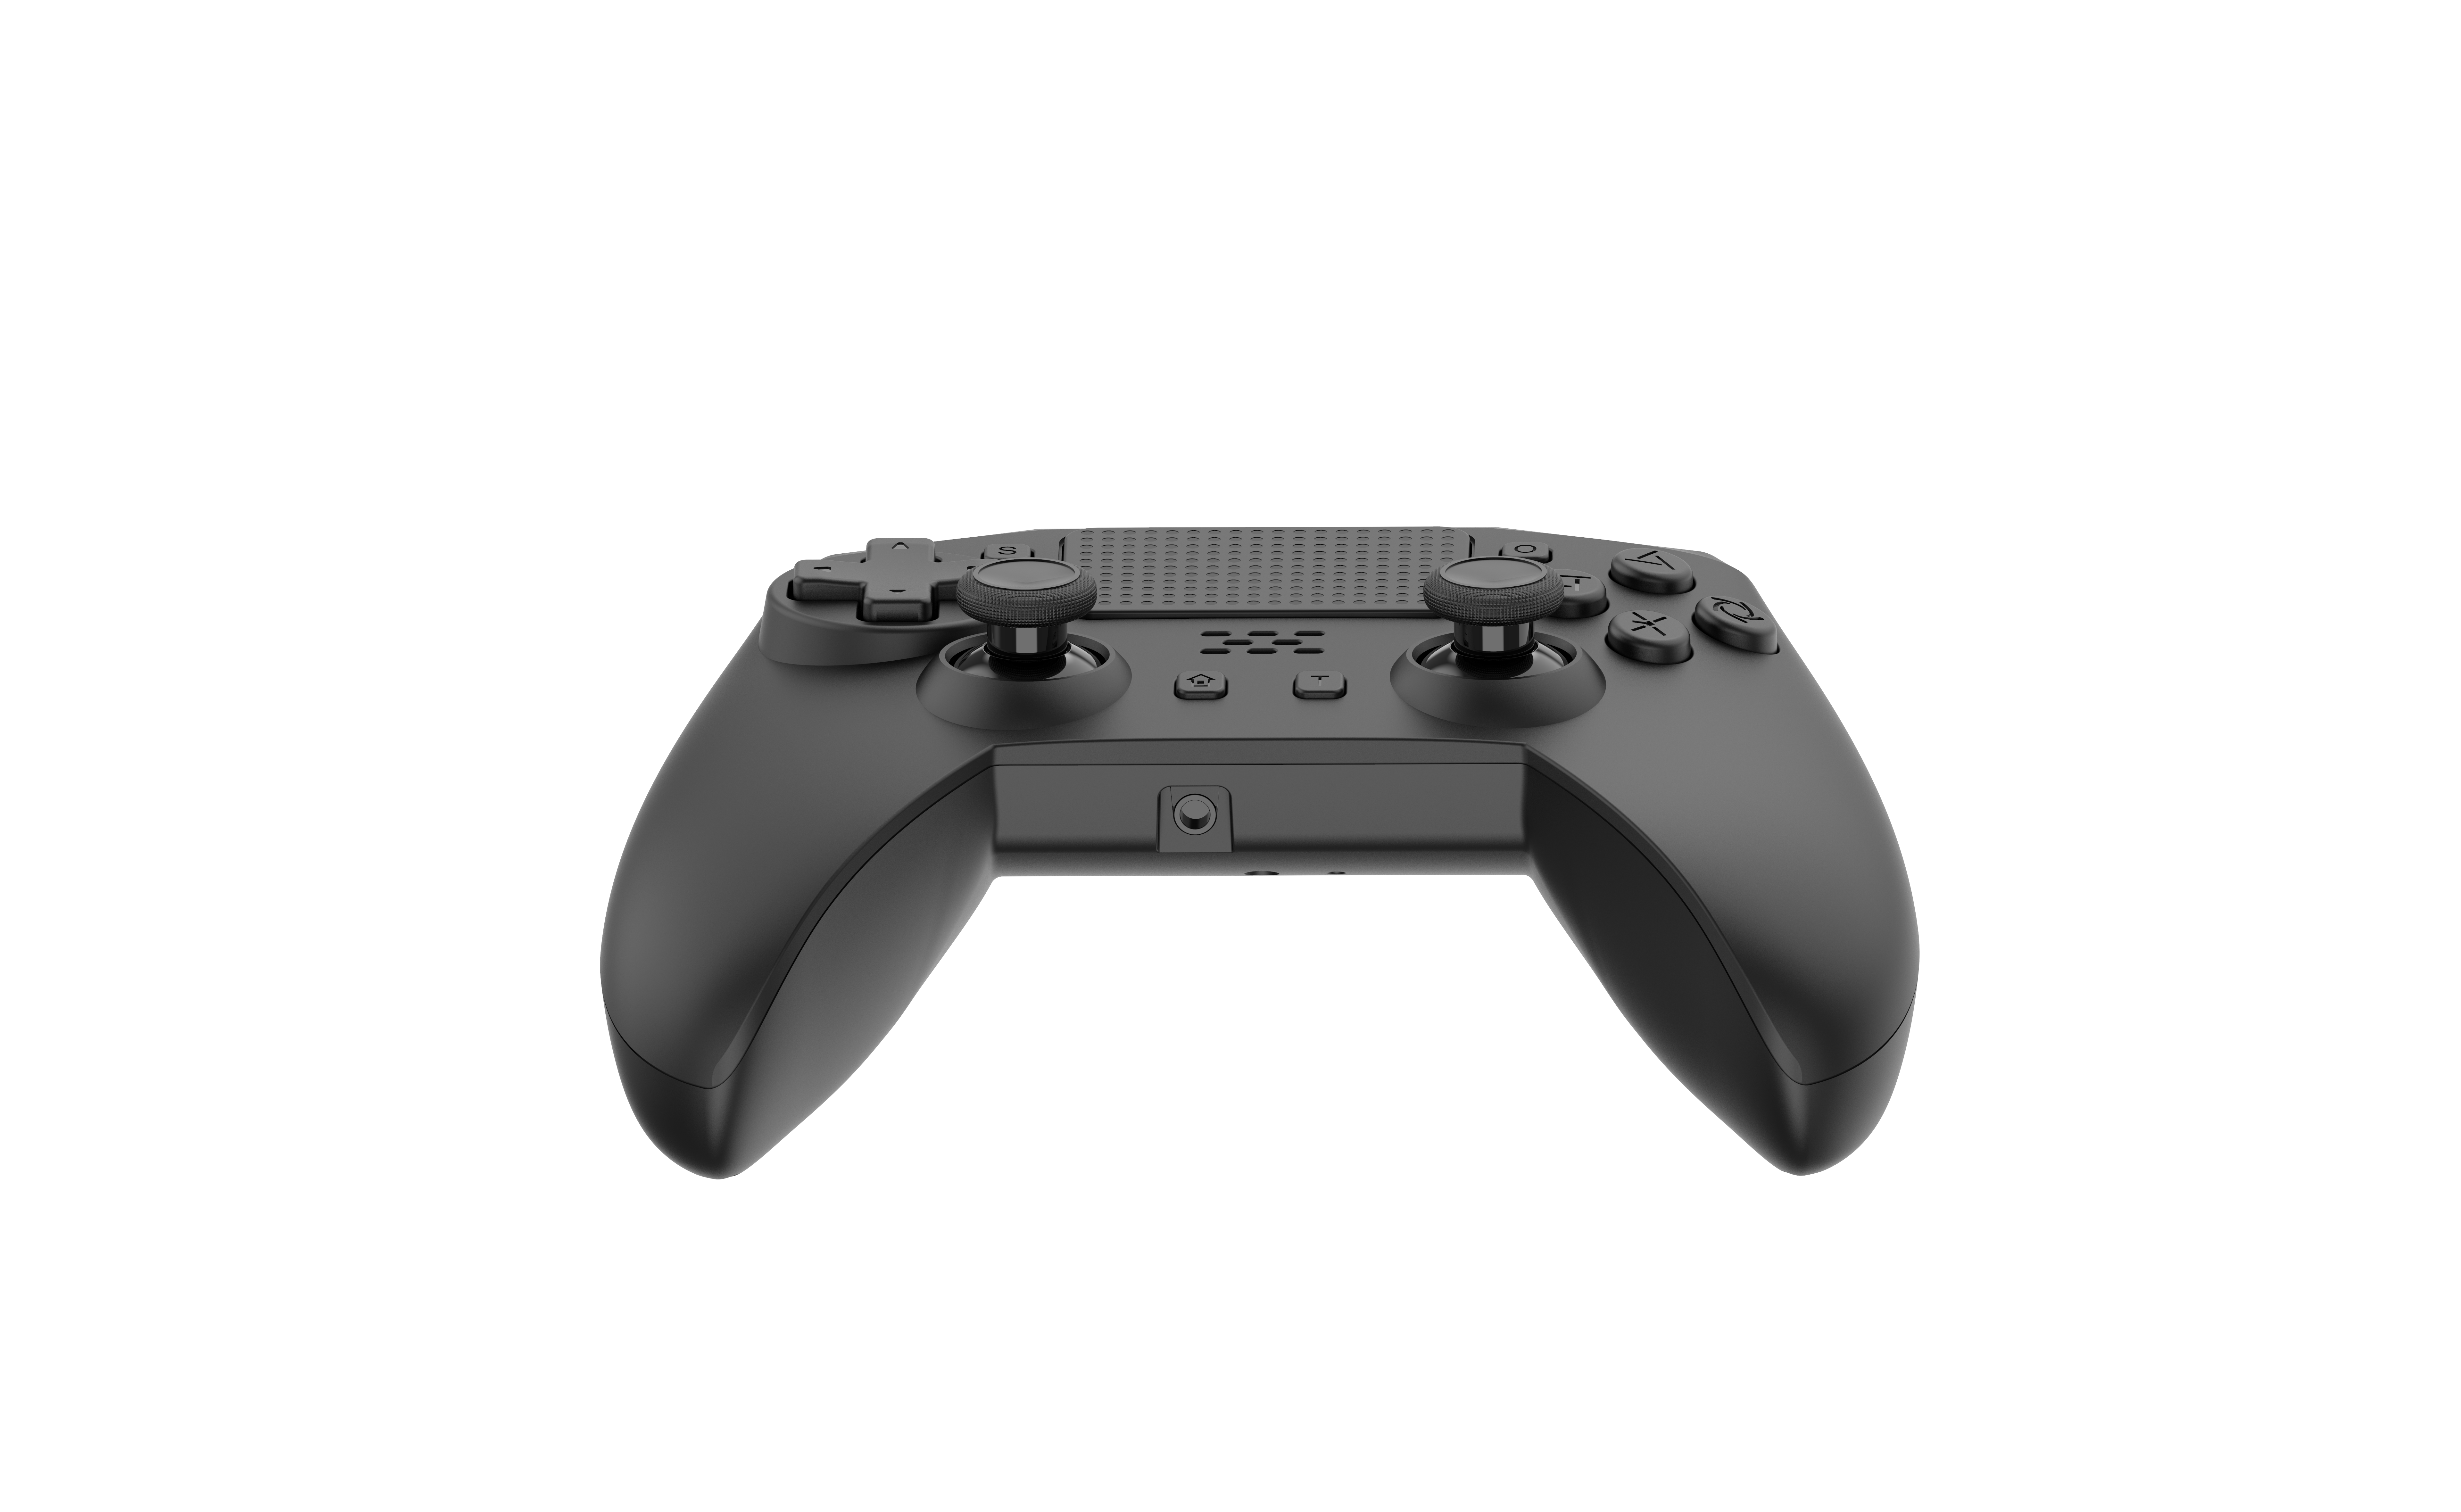 Bluetooth Wireless Controller Game Controller for PS4